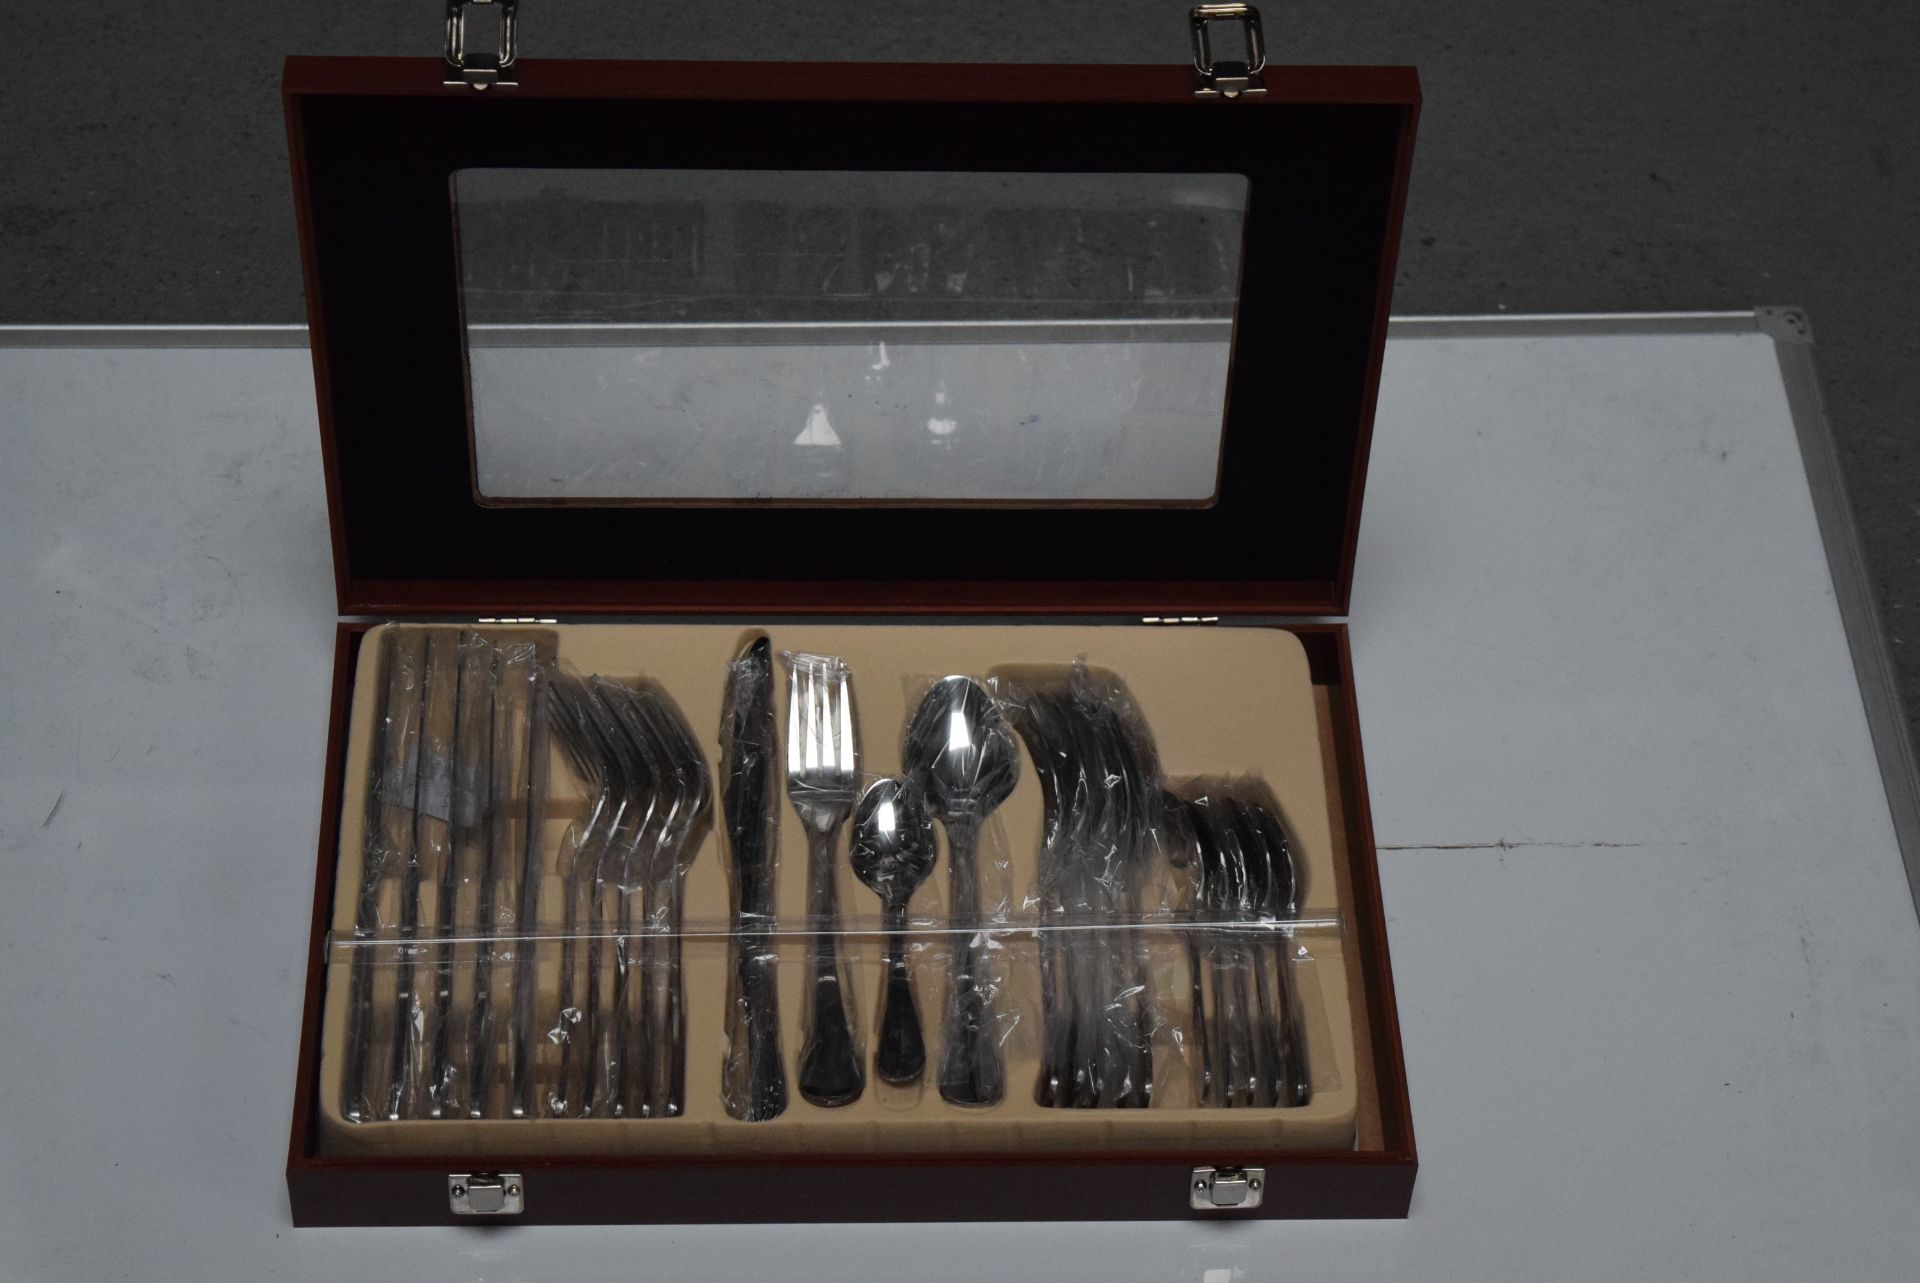 1 x BOXED BRAND NEW ROMAN CONRAD COLLECTION 24 PIECE LUXURY HOME DINING CUTLERY SET IN STAINLESS